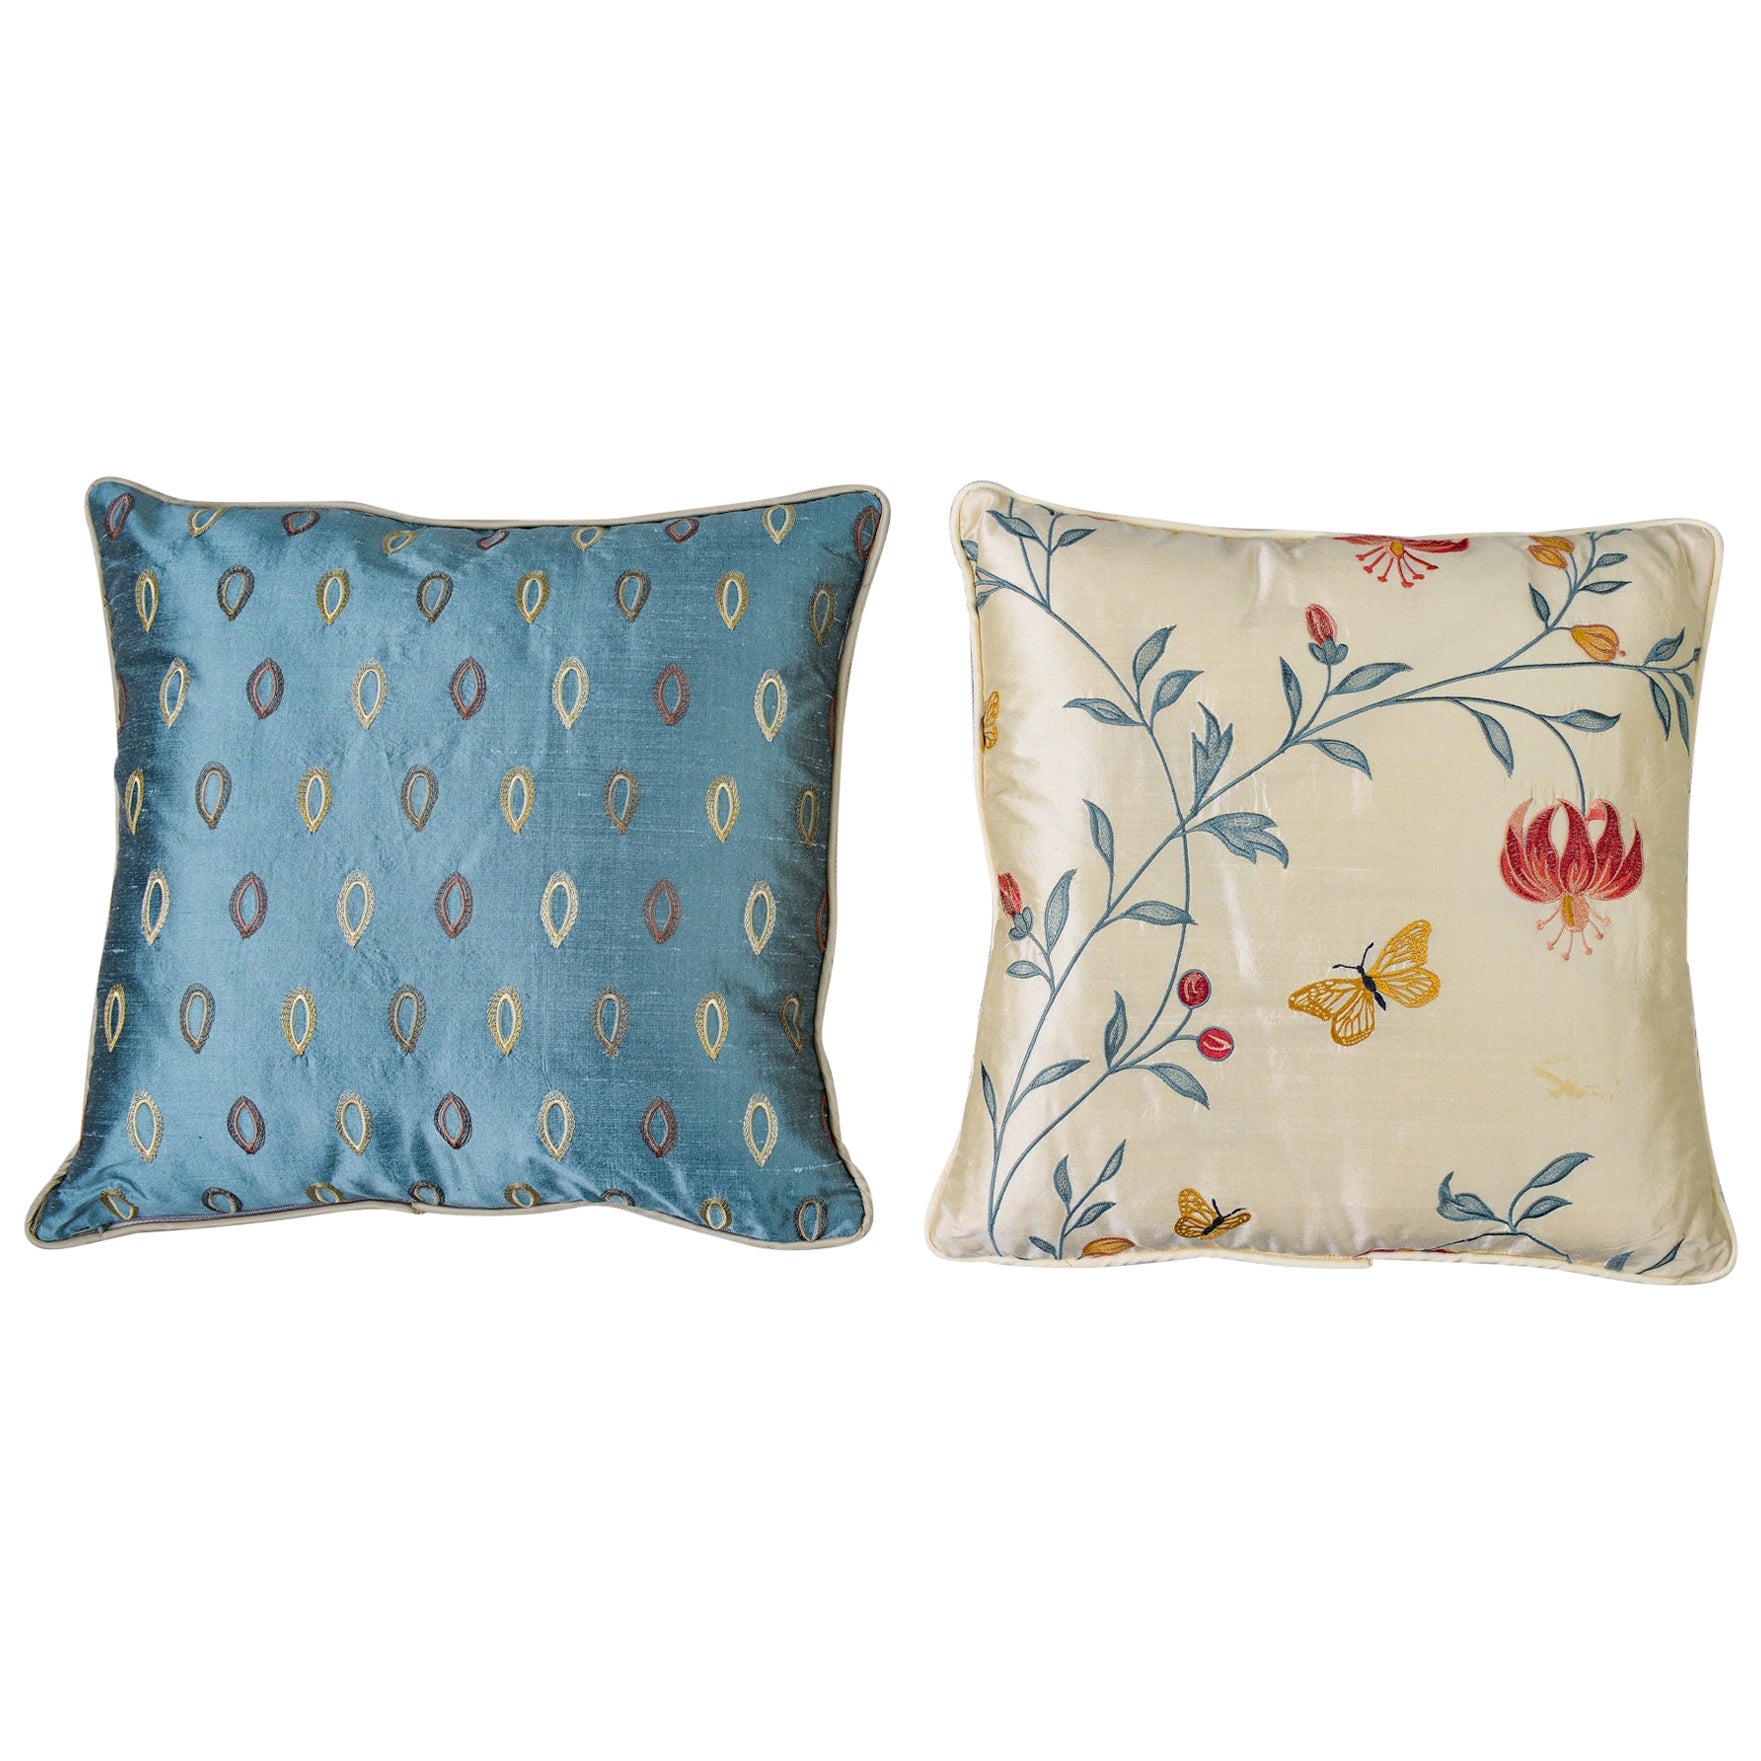 B/2449 -  Beautiful pillows: one with a light blu background, the other all clear: SOLD _
They are all embroidered, very elegant.
Now You can buy even just the blue one for 200 Euro: ONLY ONE.